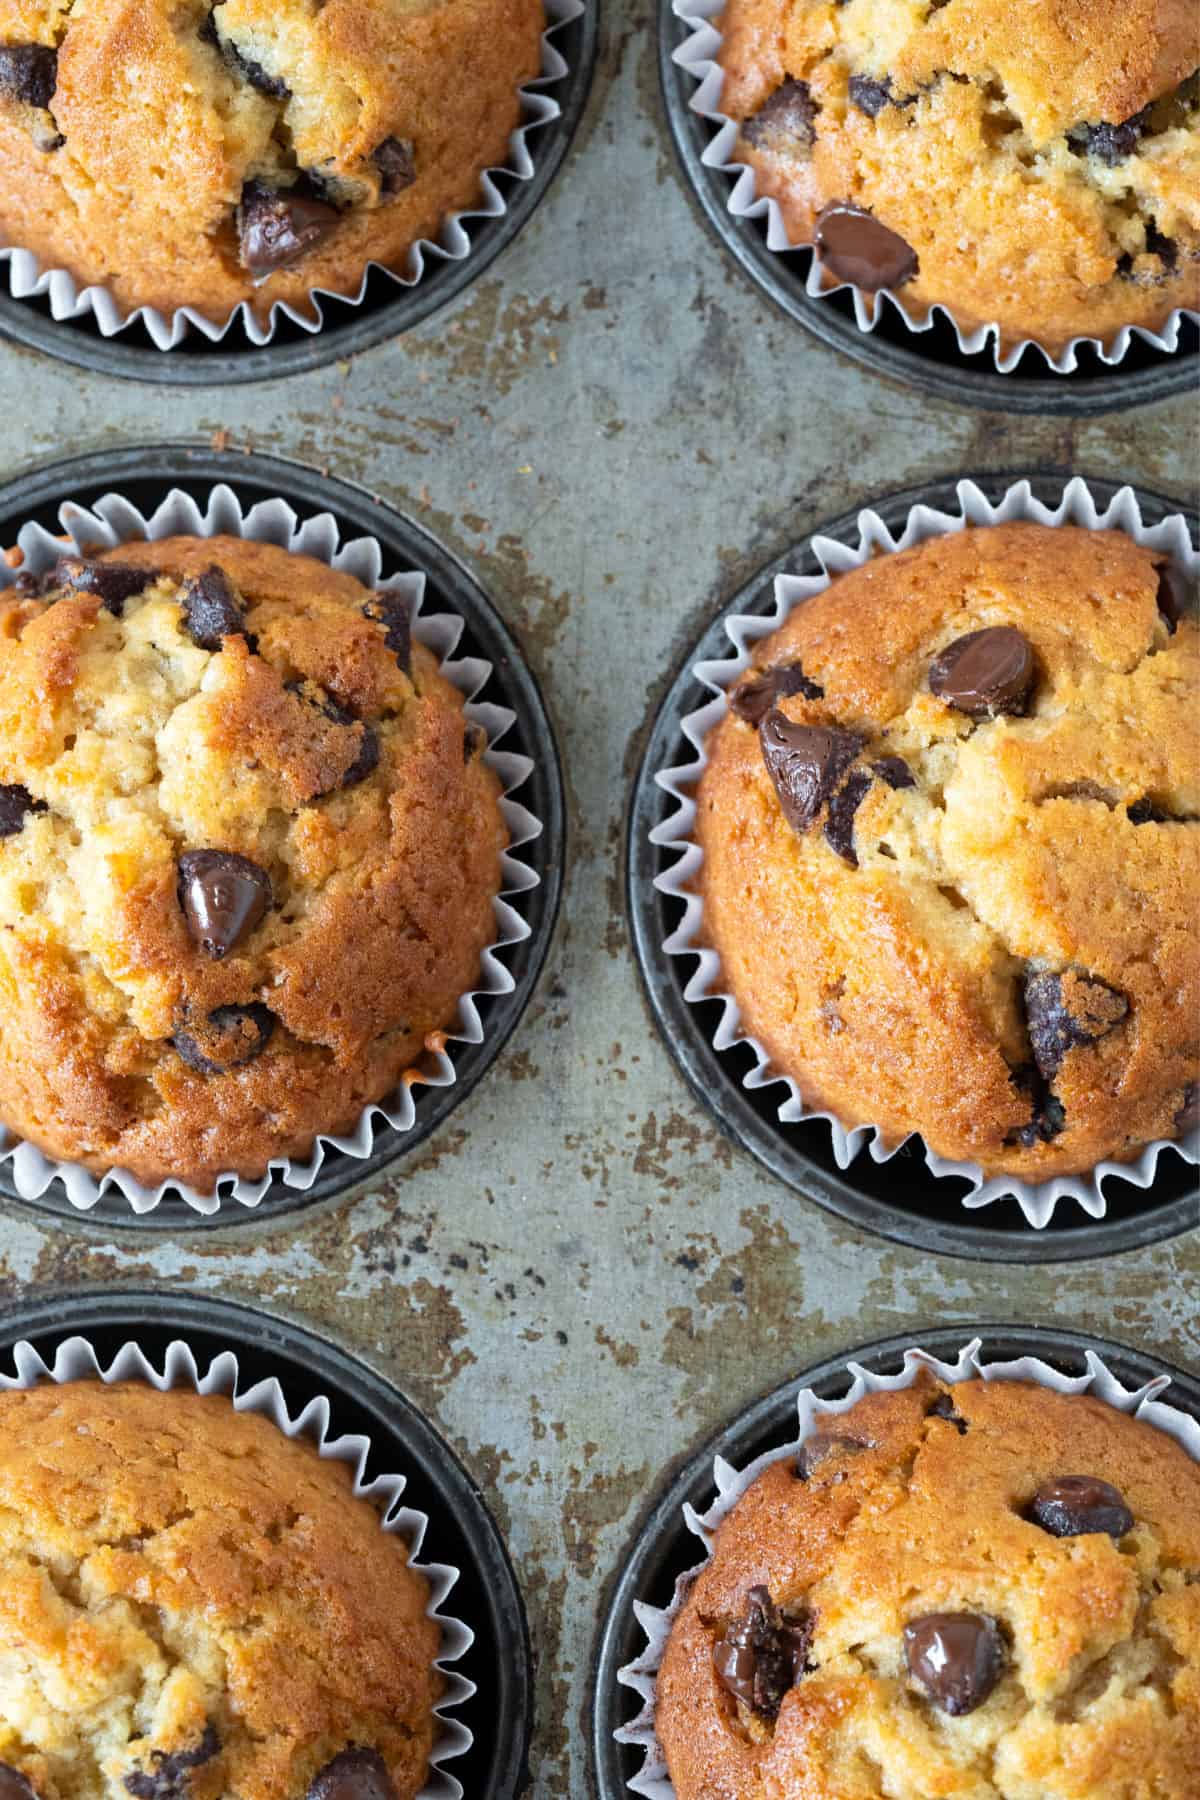 Close up partial view of chocolate chip muffins in a vintage metal pan.